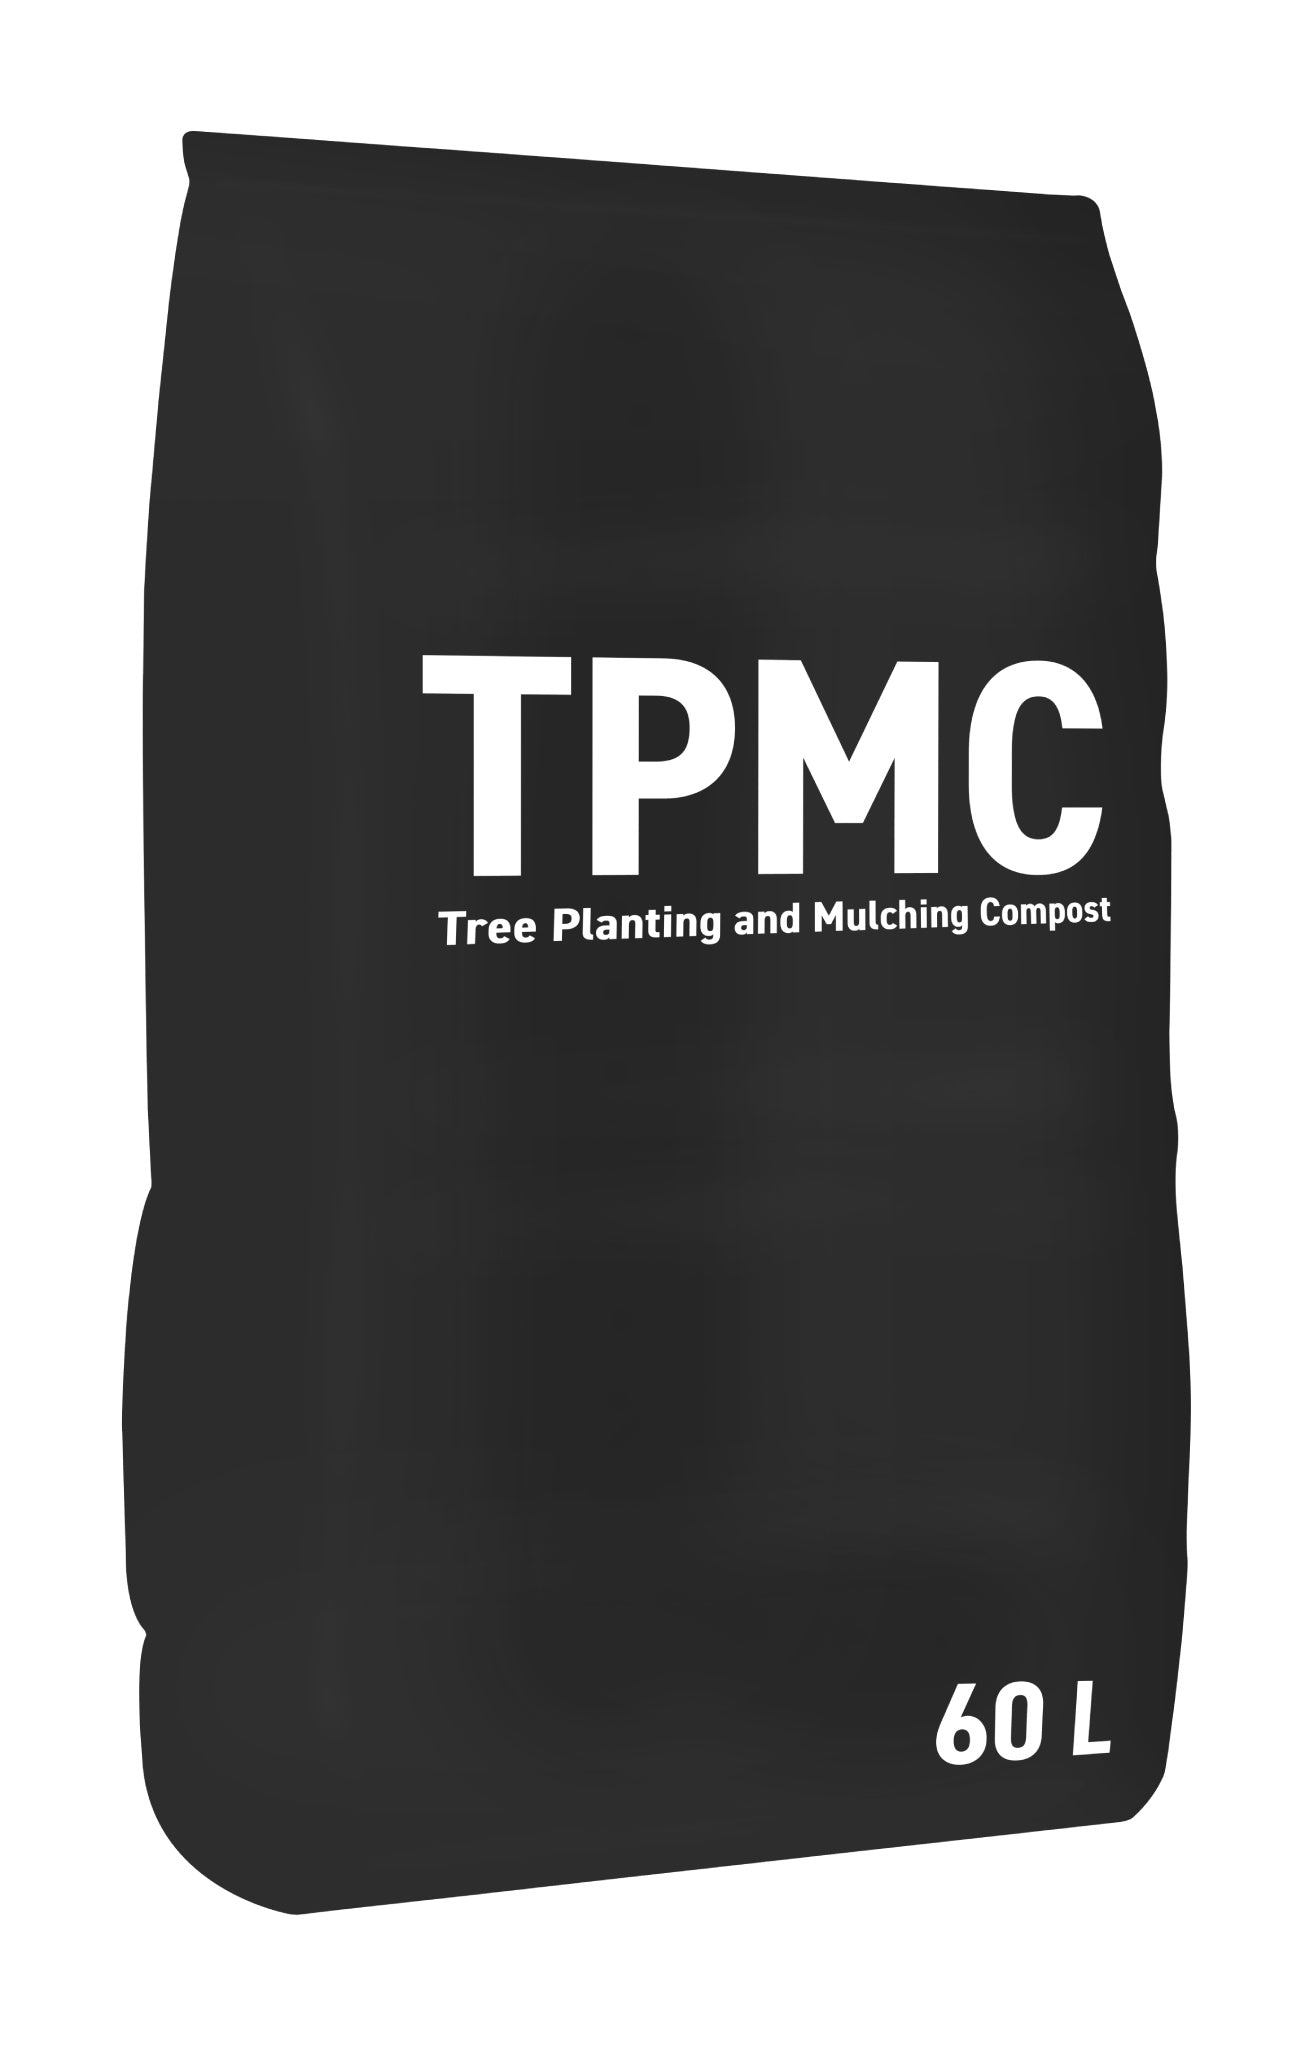 TPMC Tree Planting and Mulching Compost 60L